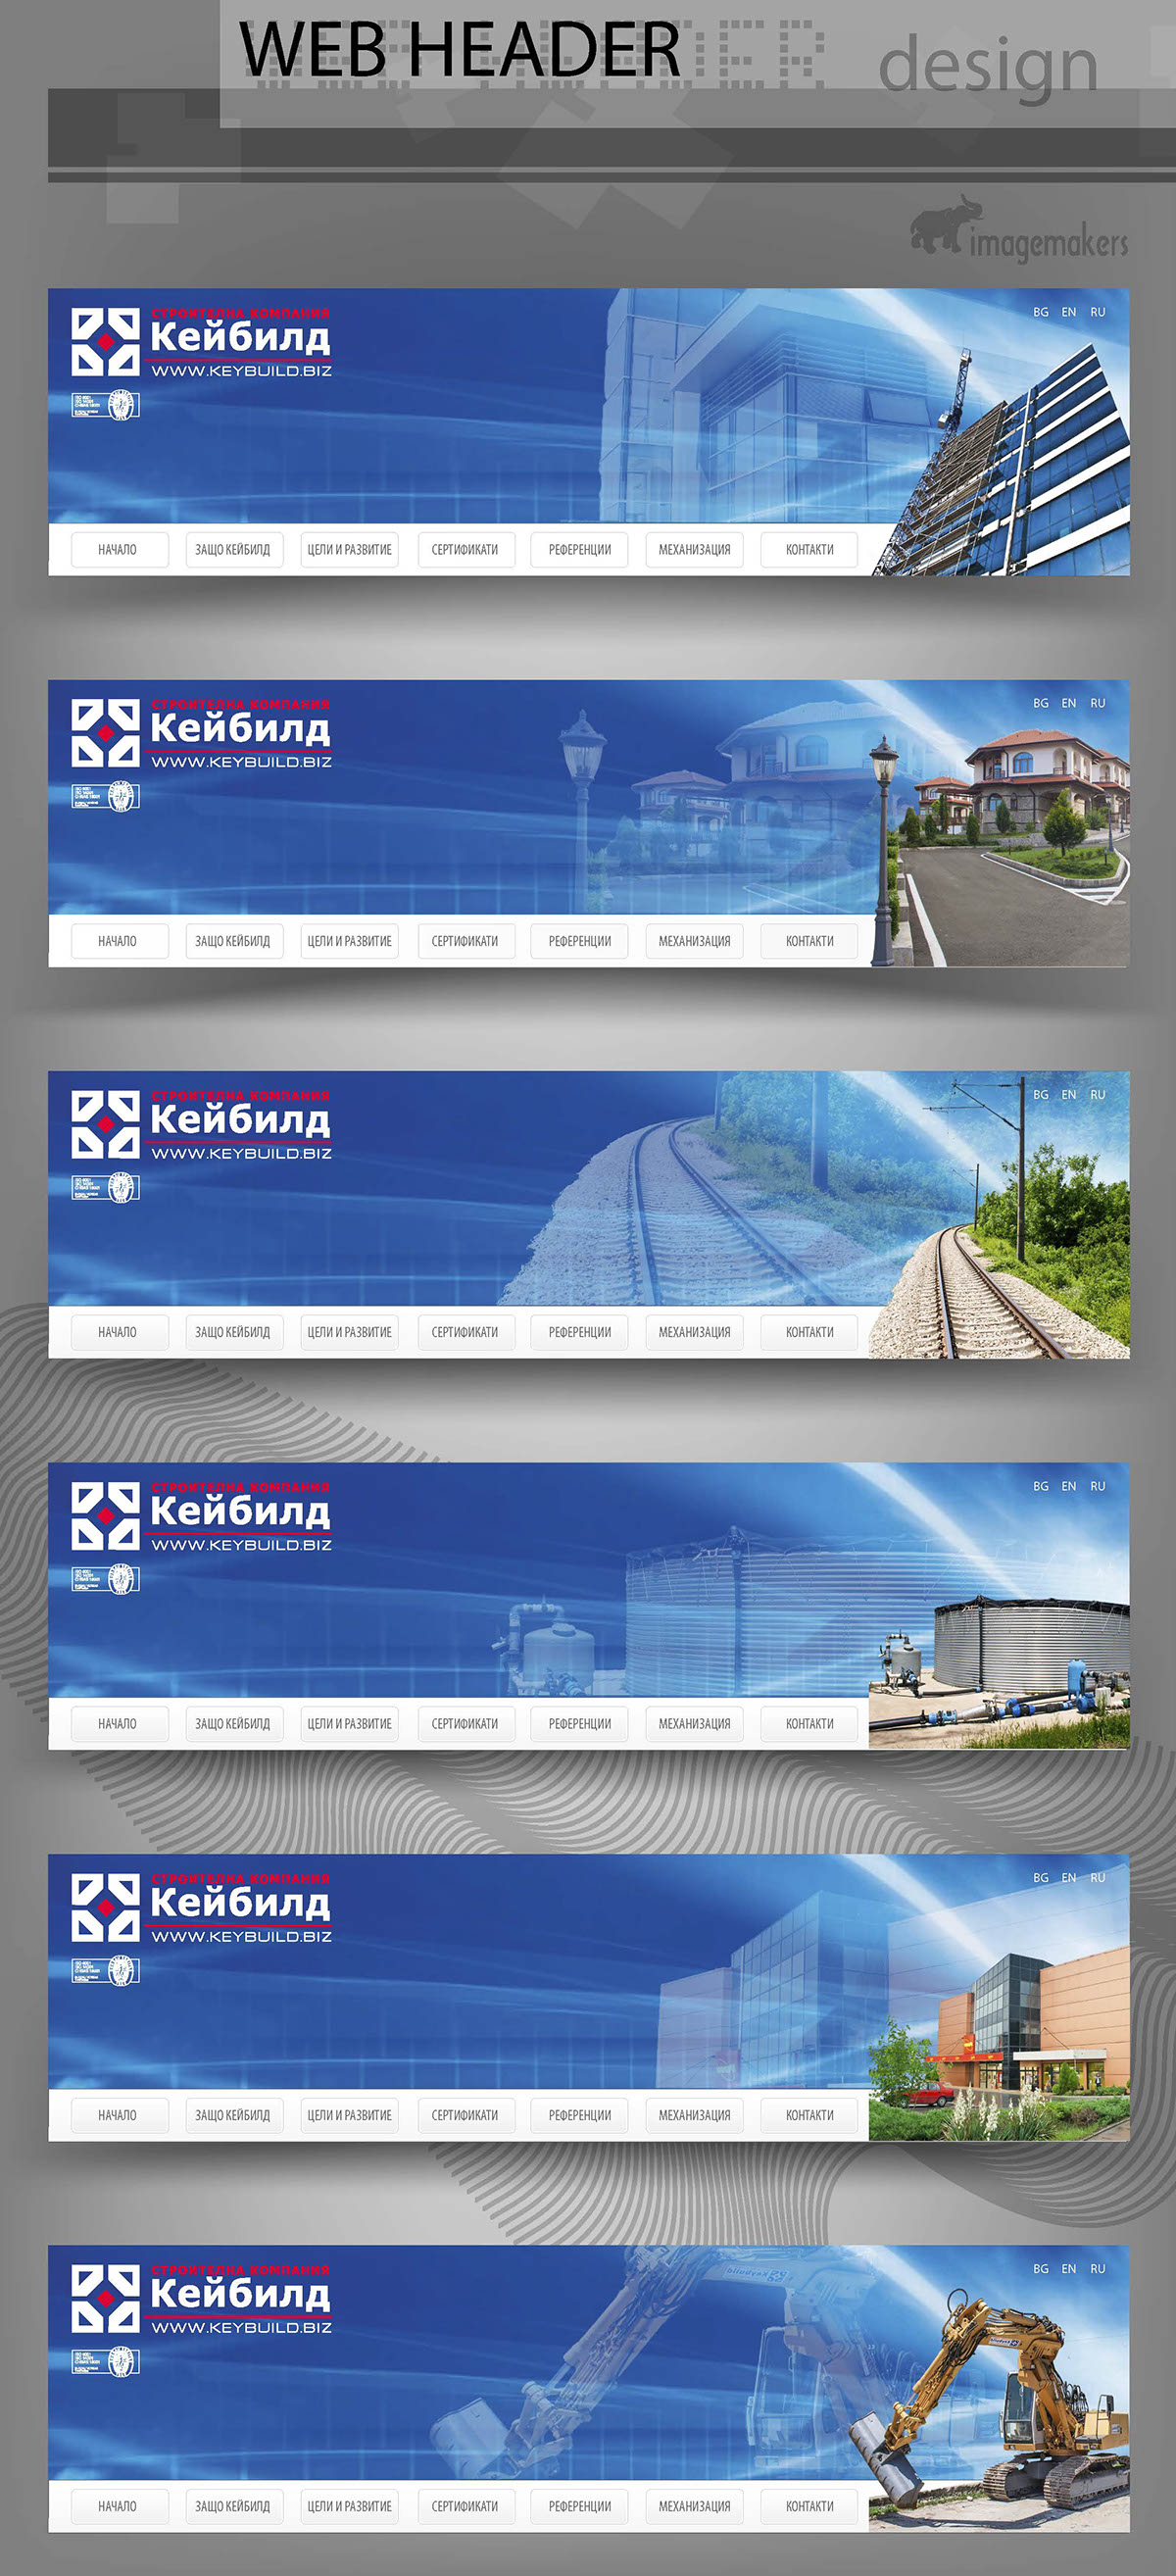 Product Catalog Wen design  print  Photography  web site  corporate  panorama  building  construction  company  book